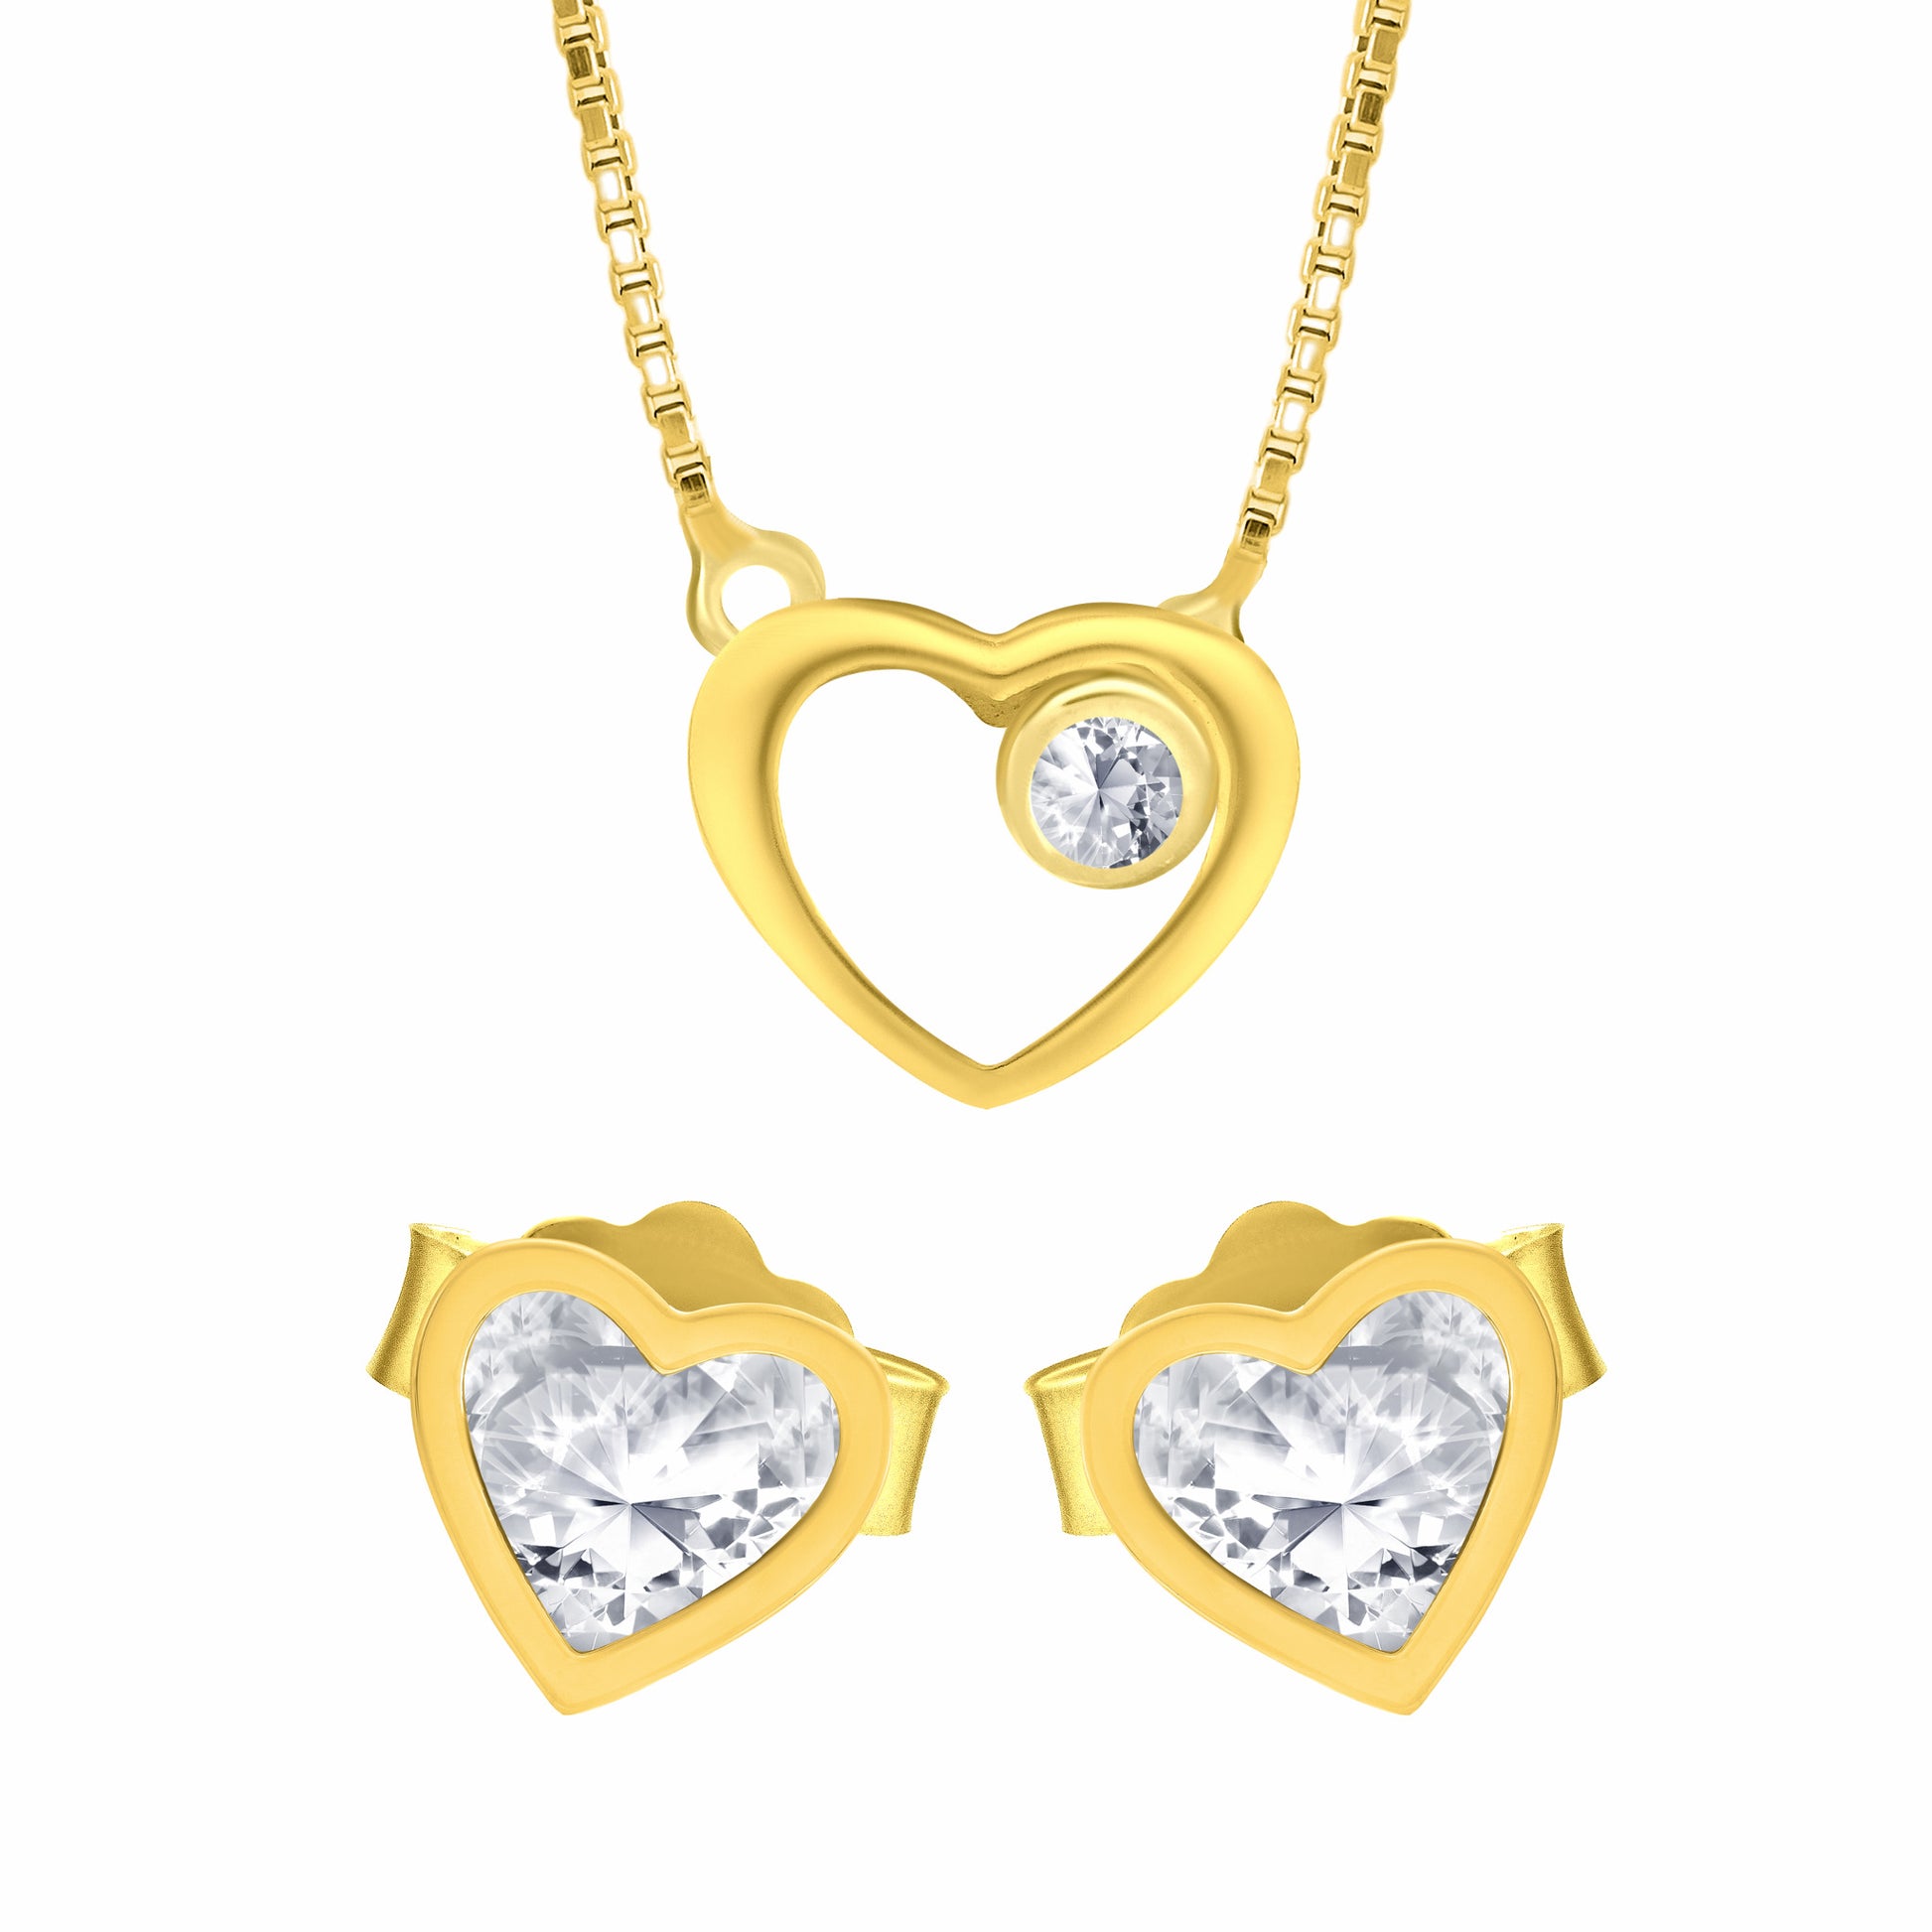 Heart Shape Earrings Necklace Gold Set on white background